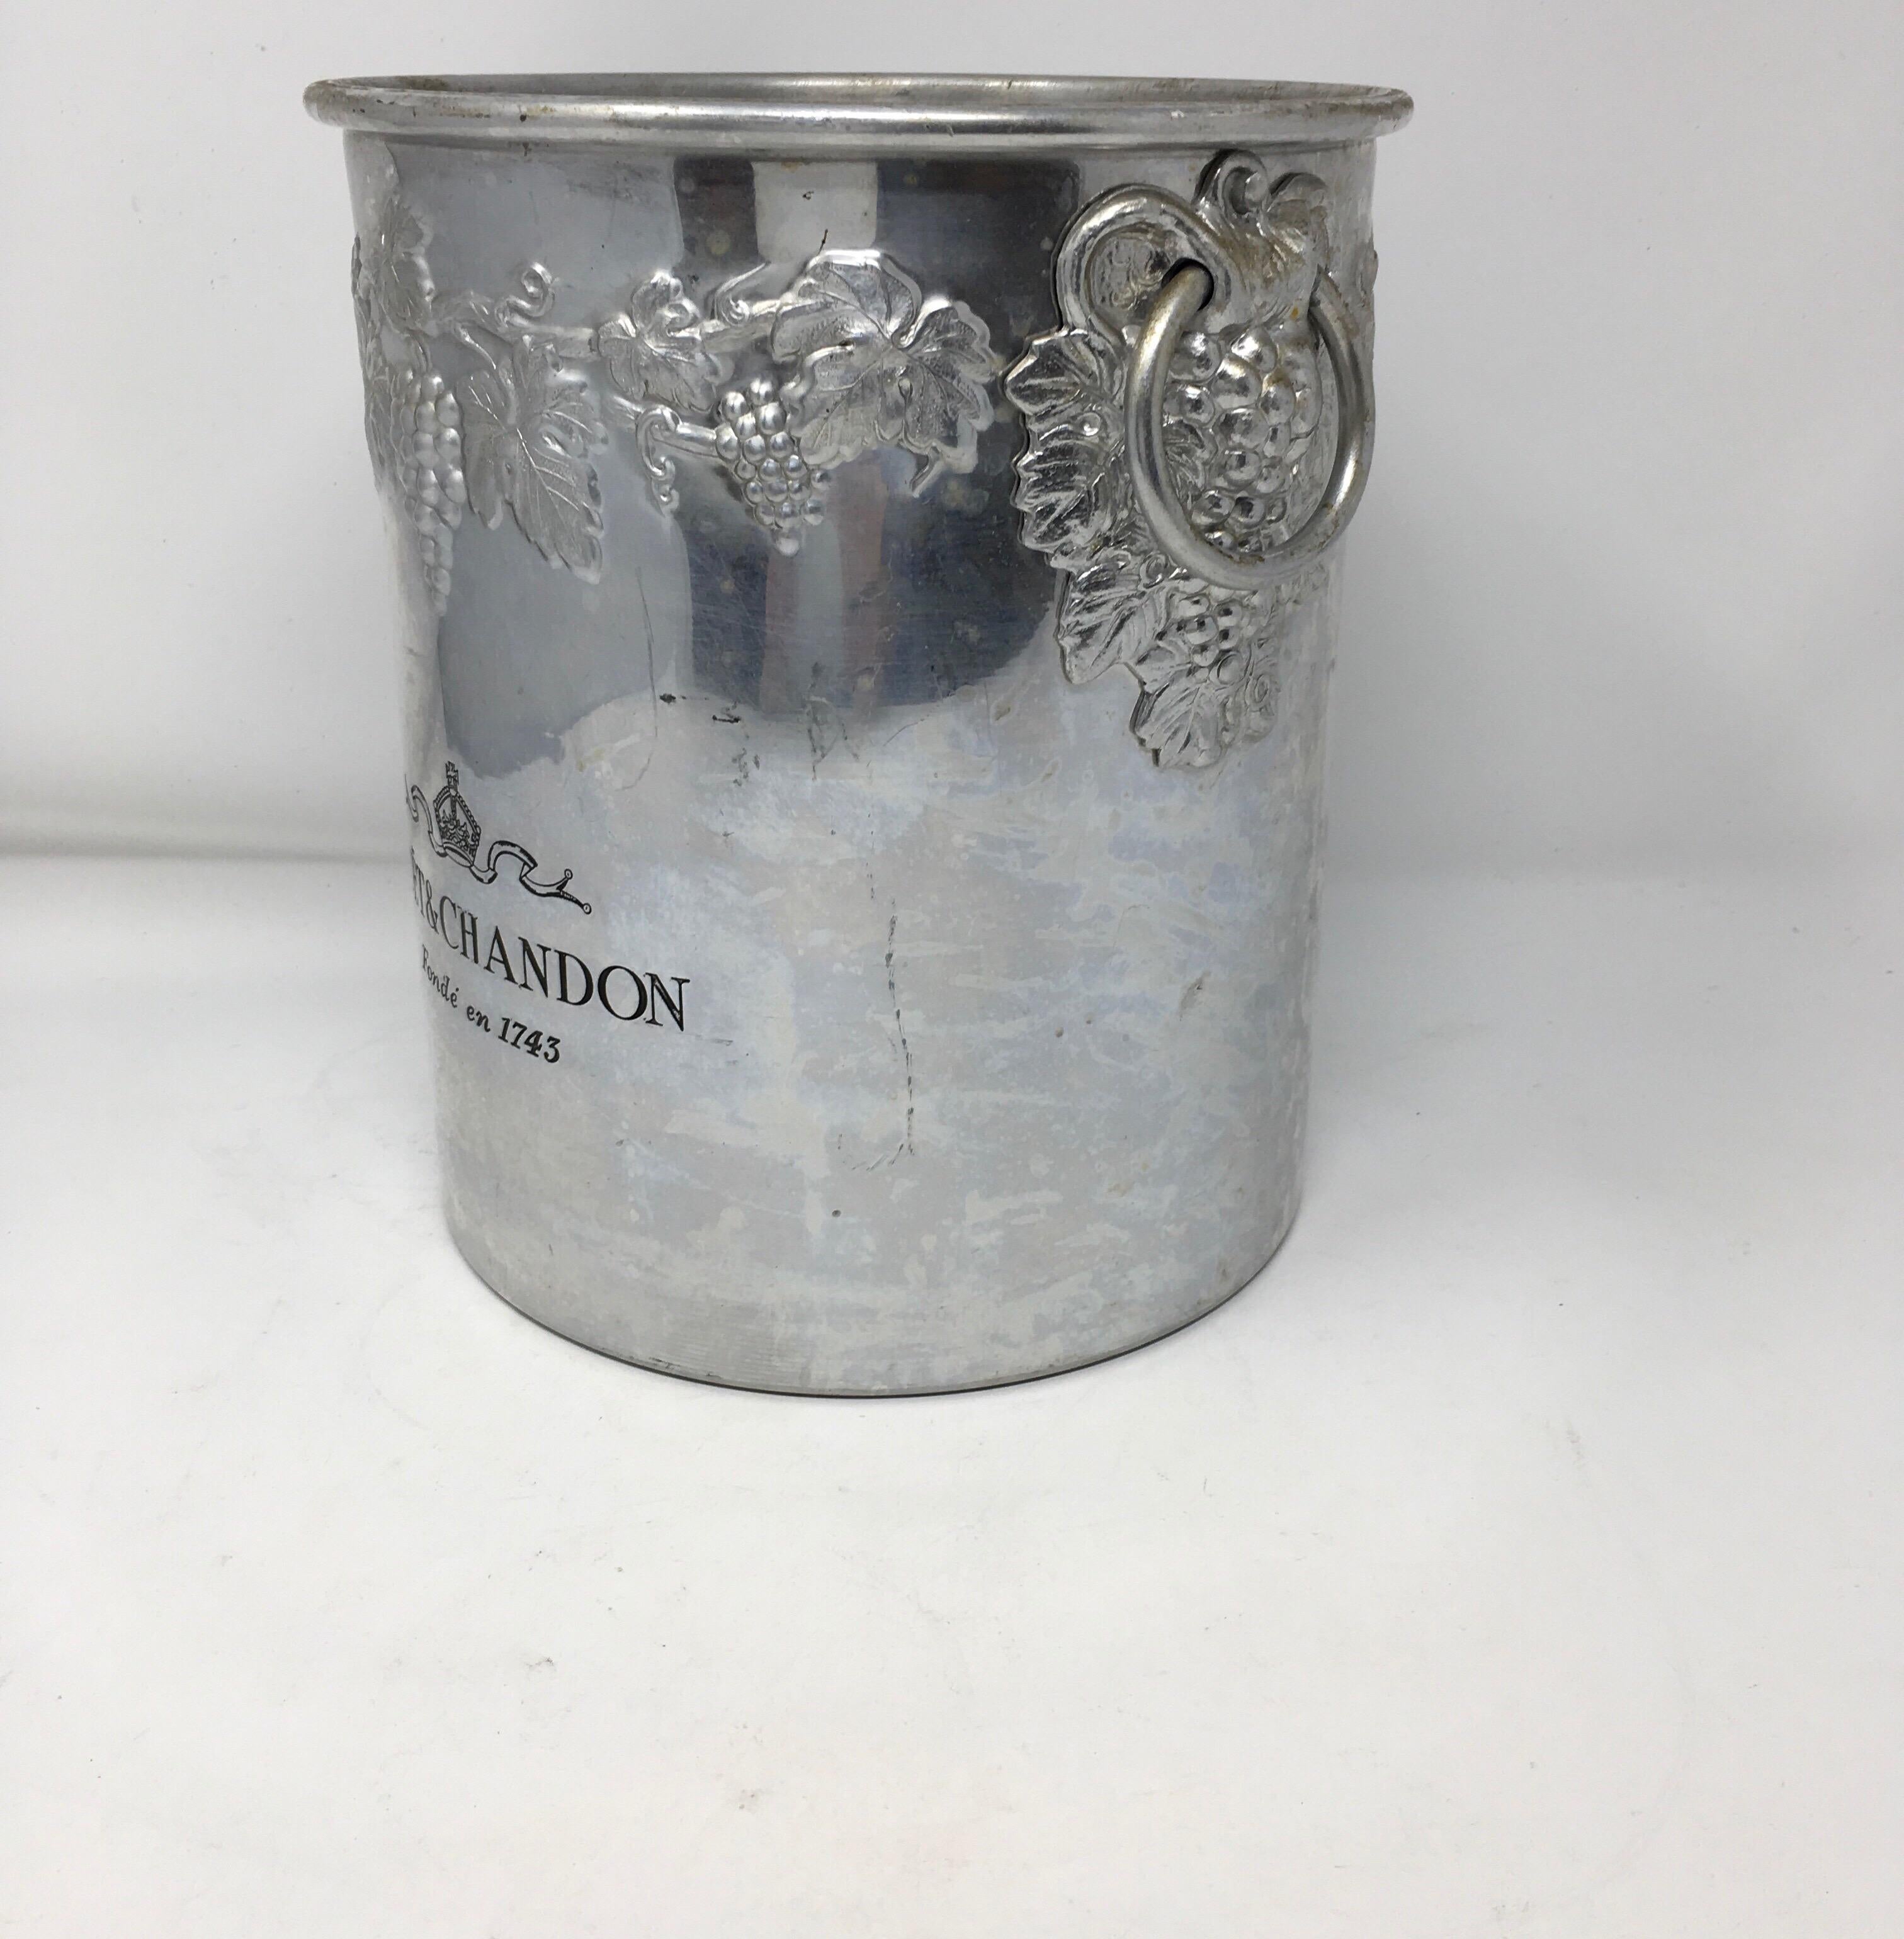 Vintage Moët & Chandon ice/champagne bucket in excellent original condition.
Made in solid pewter with the engraved champagne makers name and logo, Moët & Chandon Fondée en 1743 on the front and is decorated with a ring of grape vine and leaves